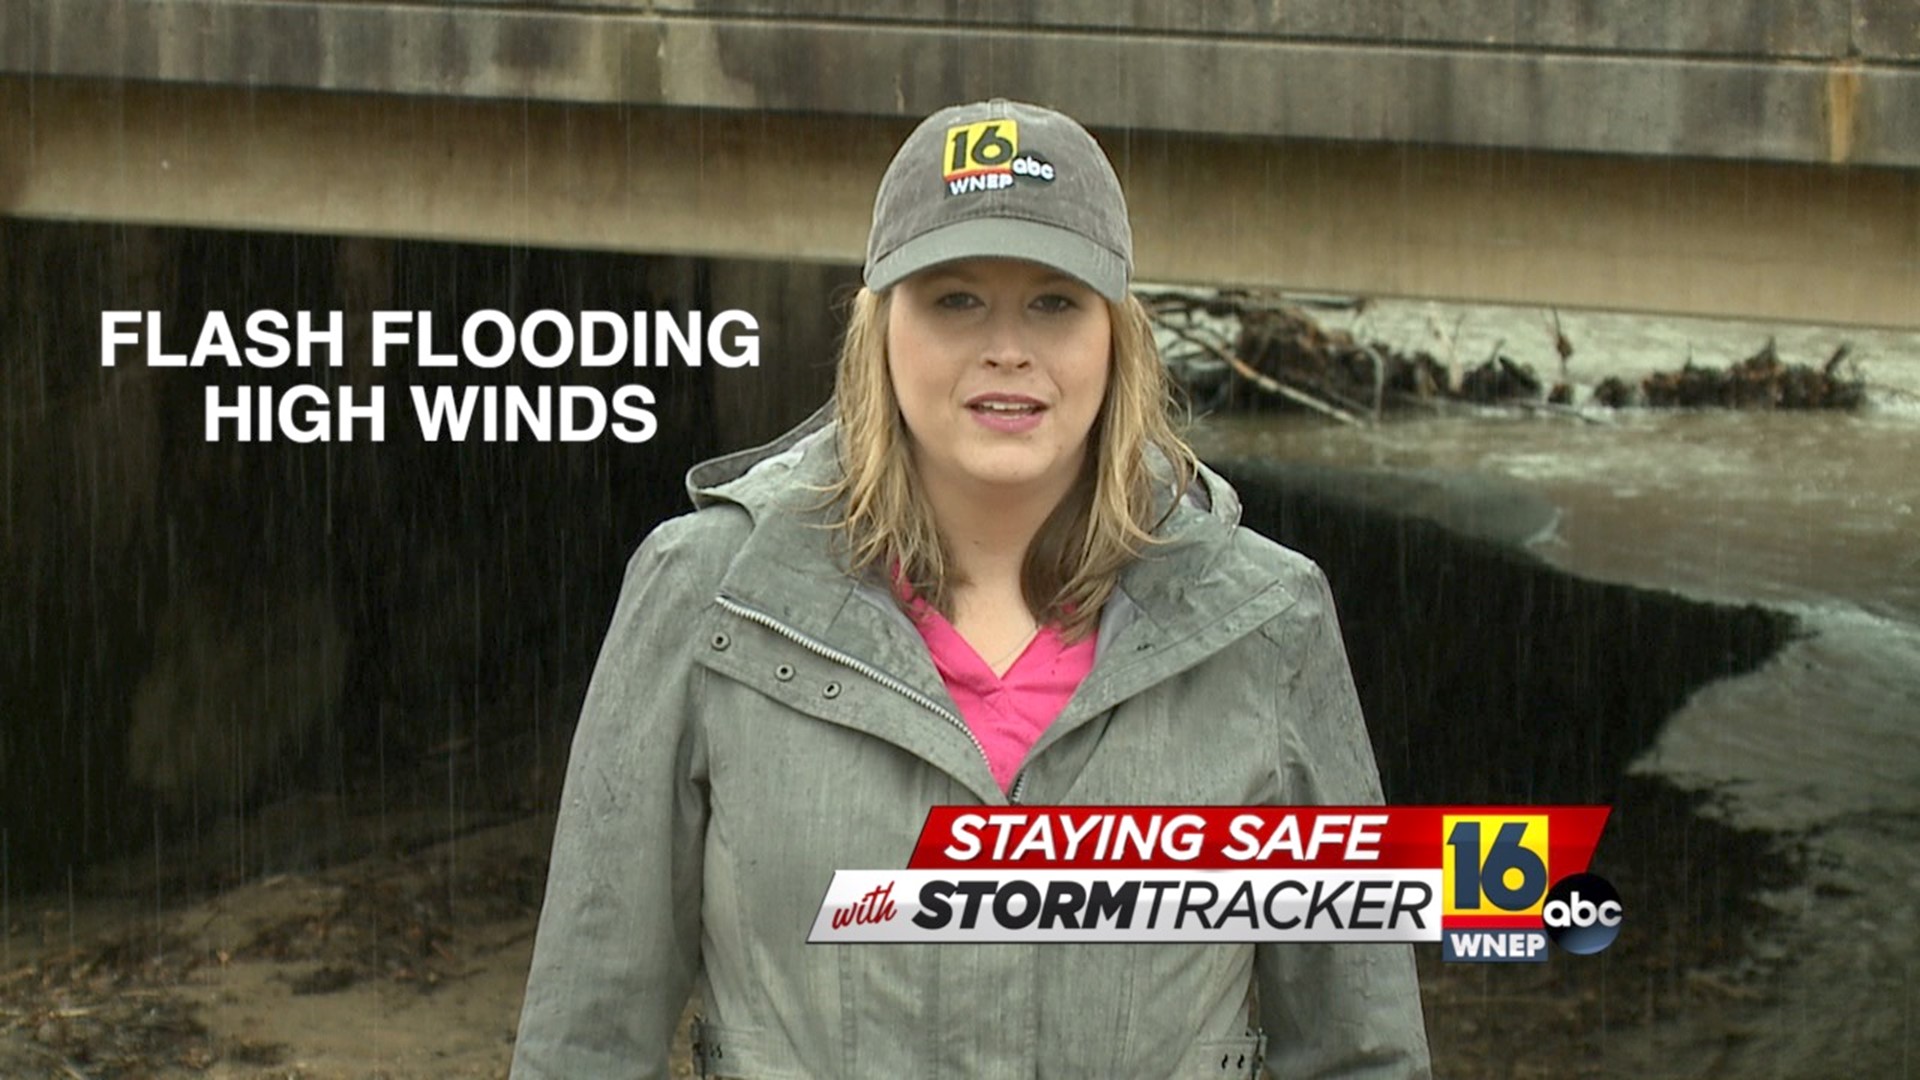 Valerie Smock takes us to frequently flooding spots and ducks when high winds burst on the scene.